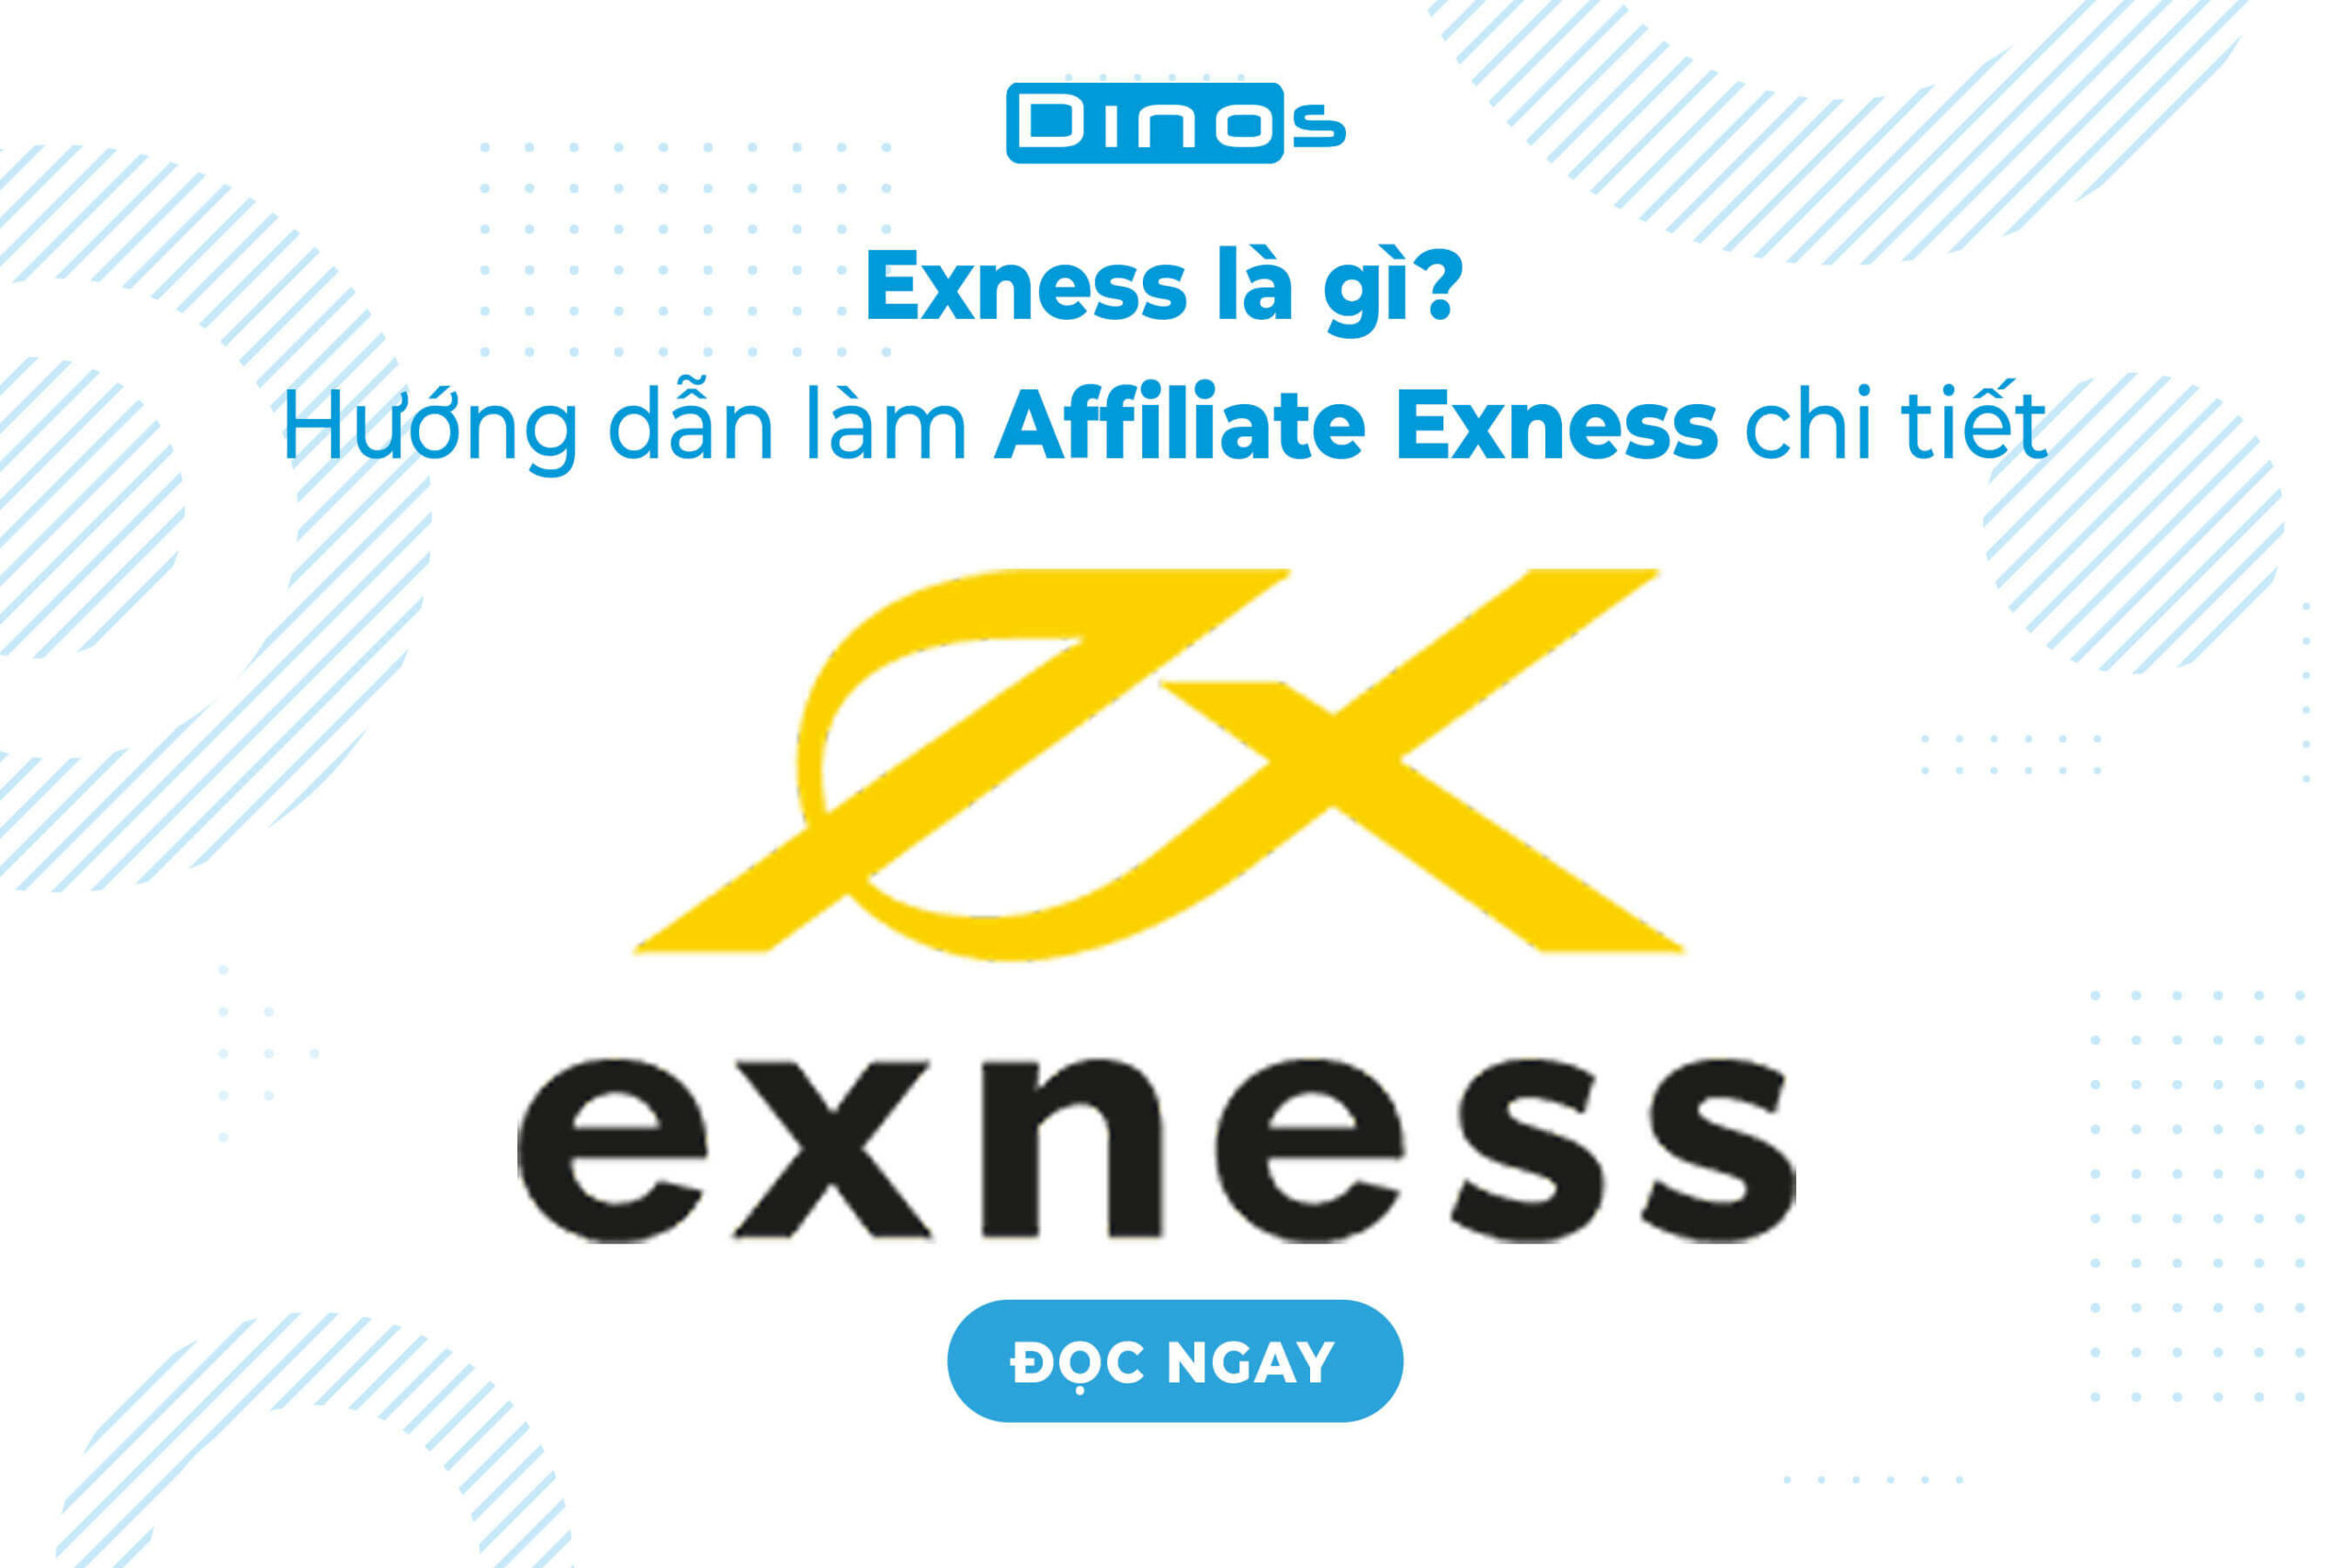 5 Ways You Can Get More Exness Pakistan While Spending Less